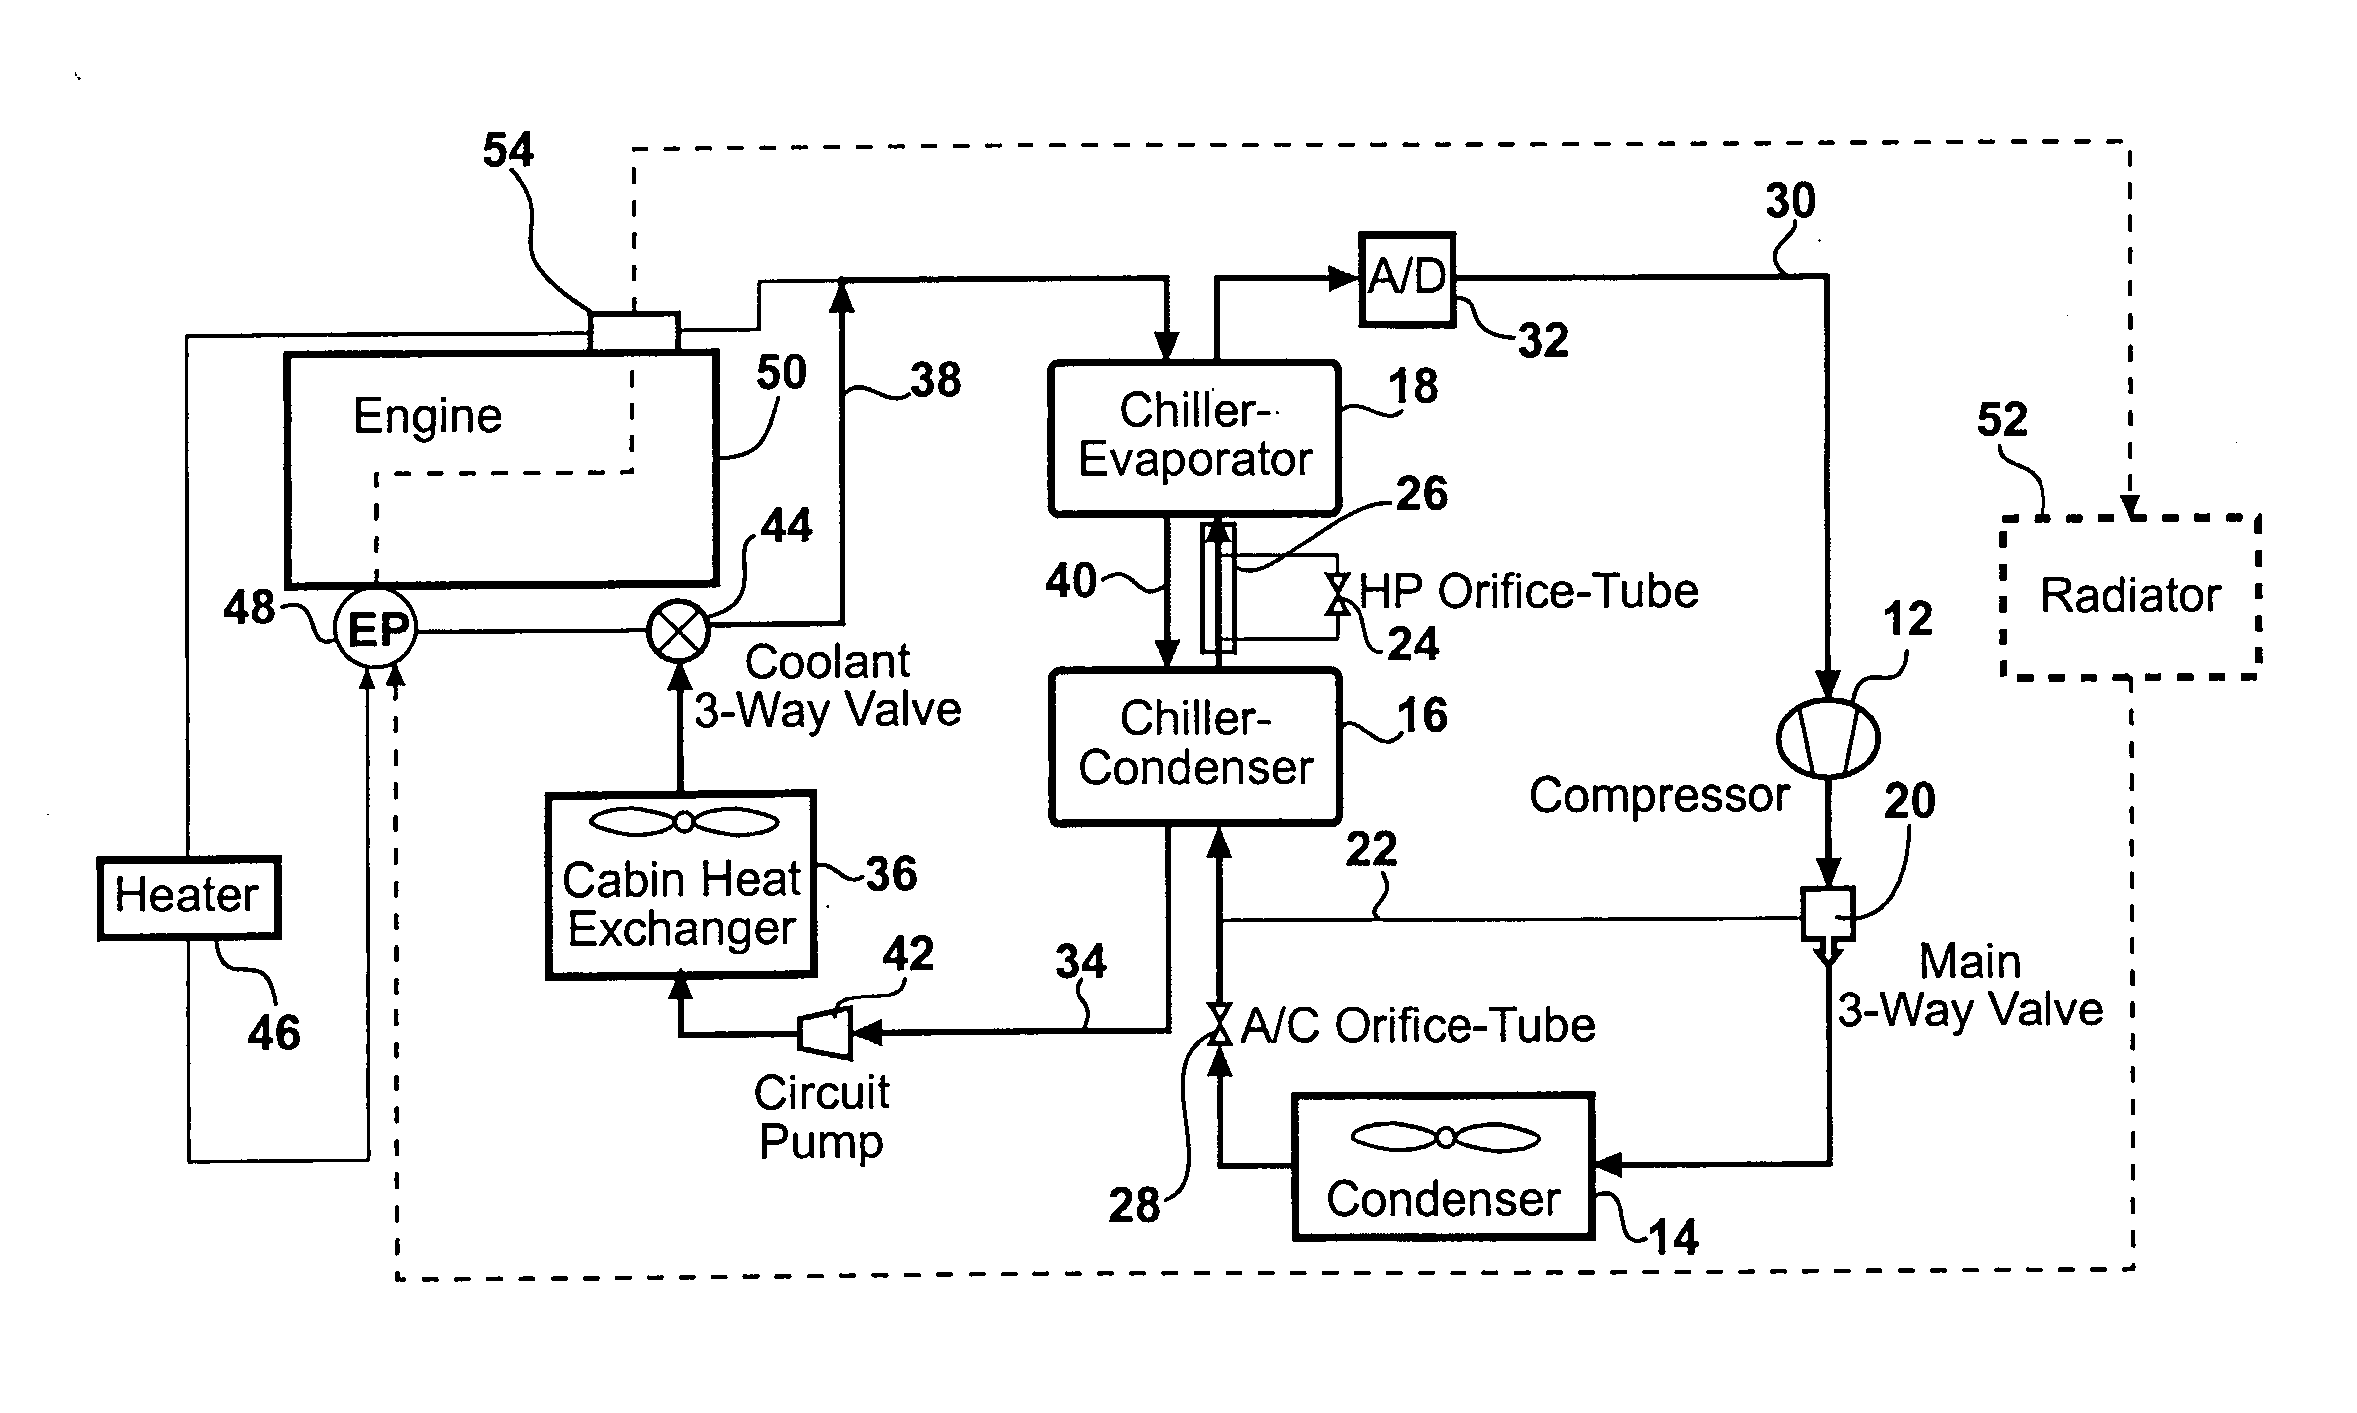 Heat pump with secondary loop air-conditioning system